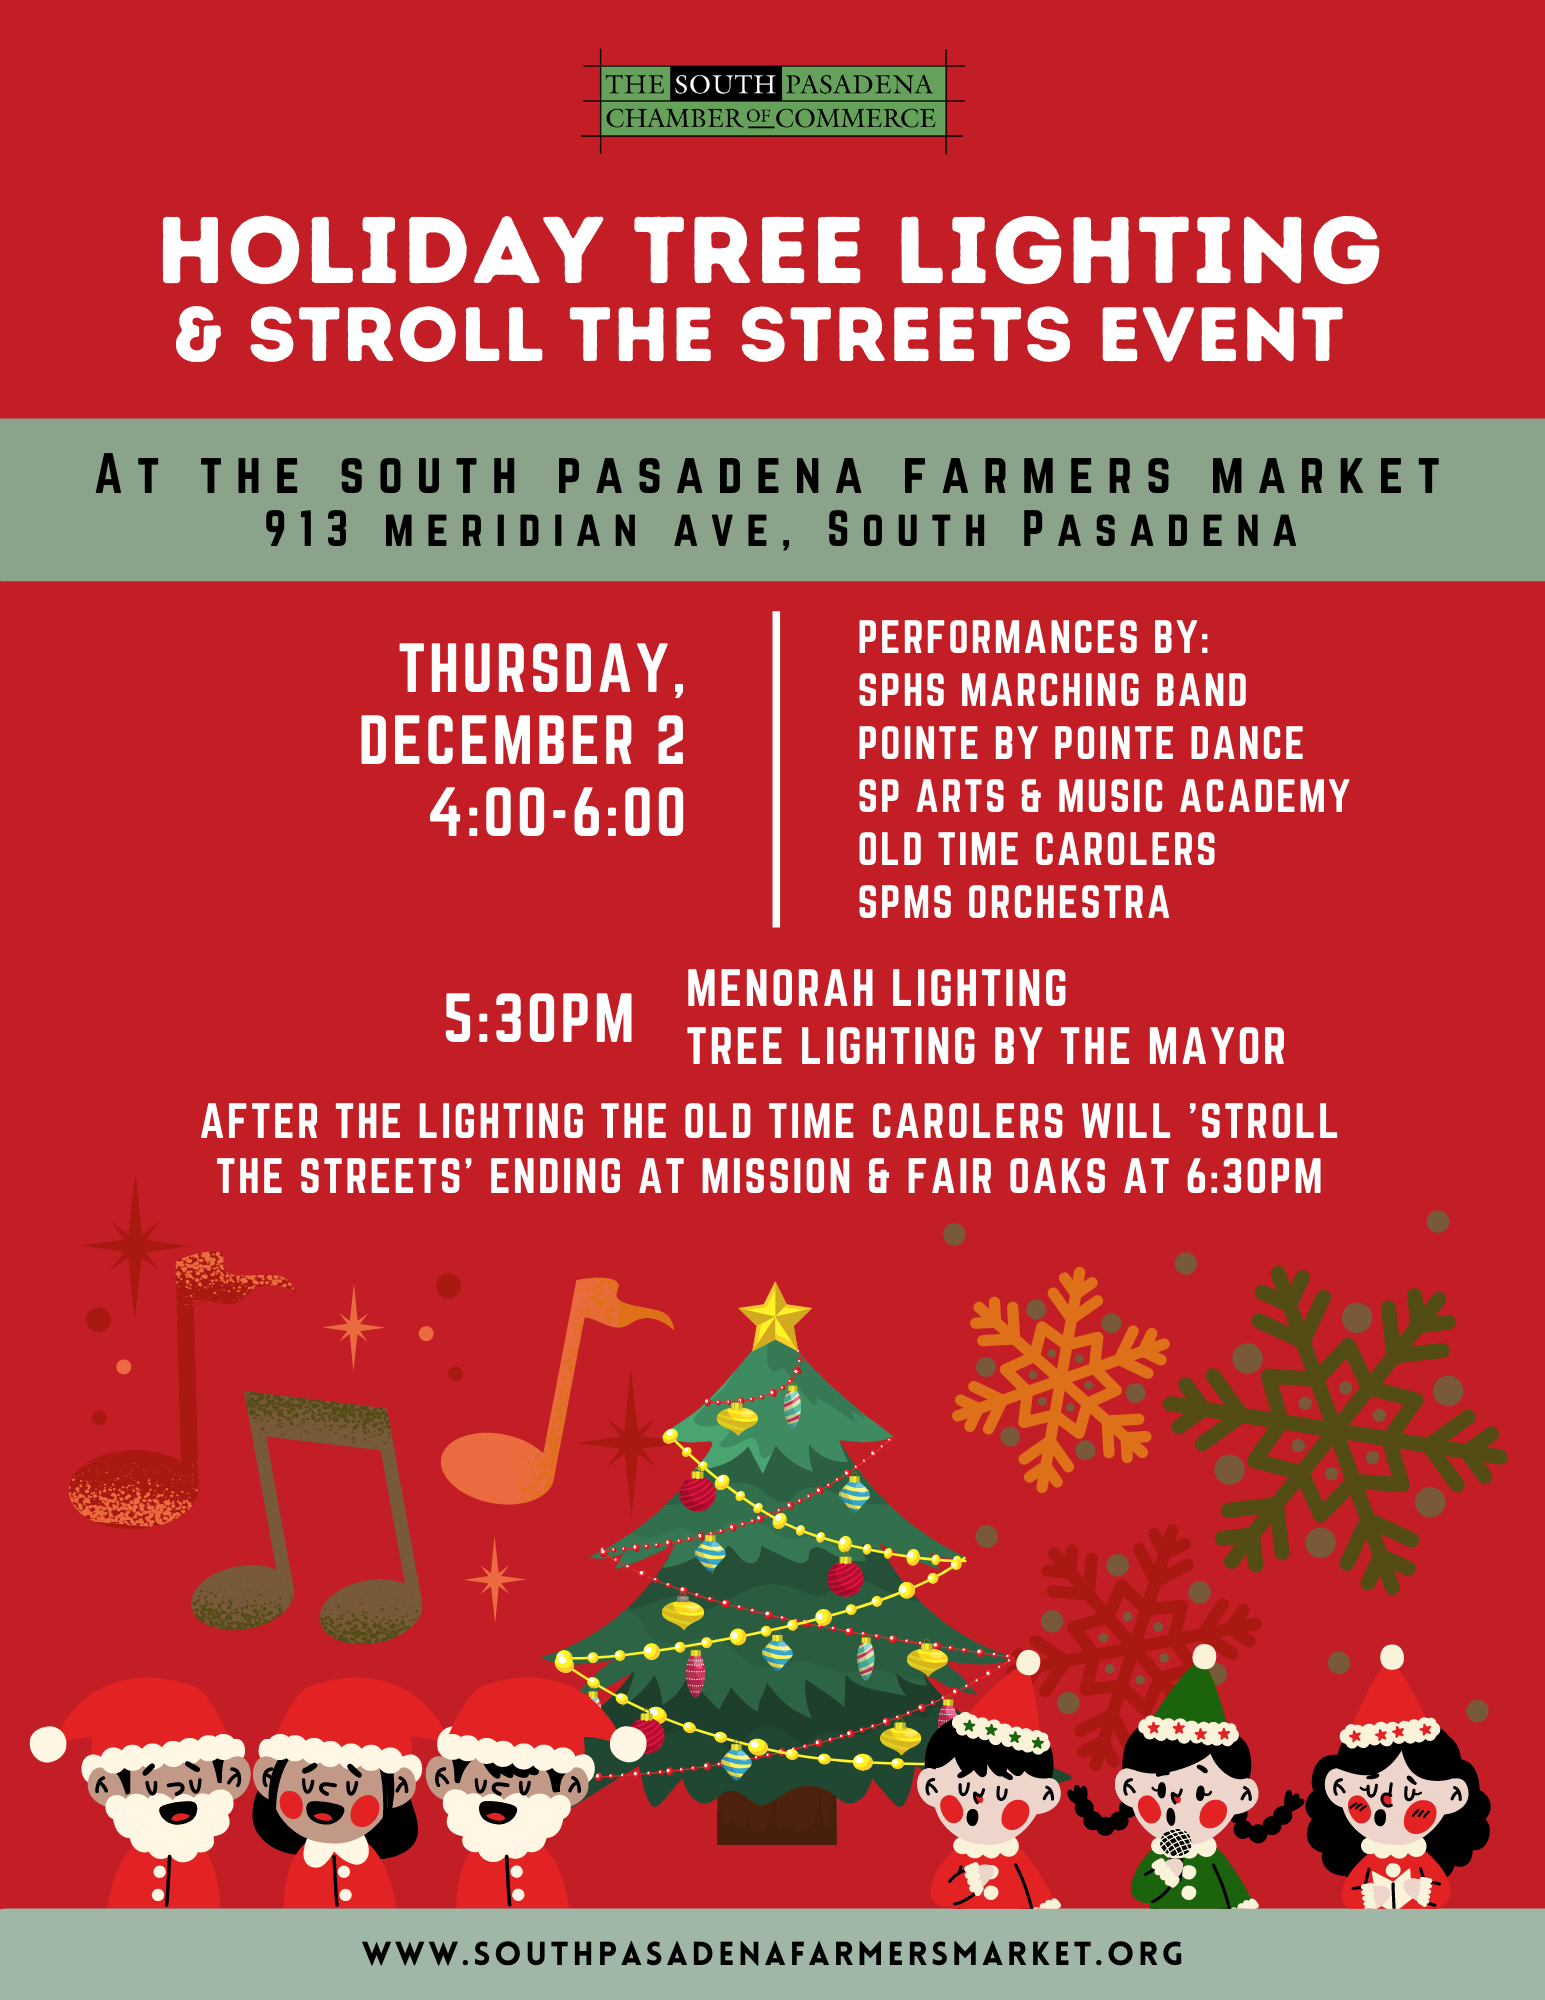 Annual Tree Lighting South Pasadena Chamber of Commerce